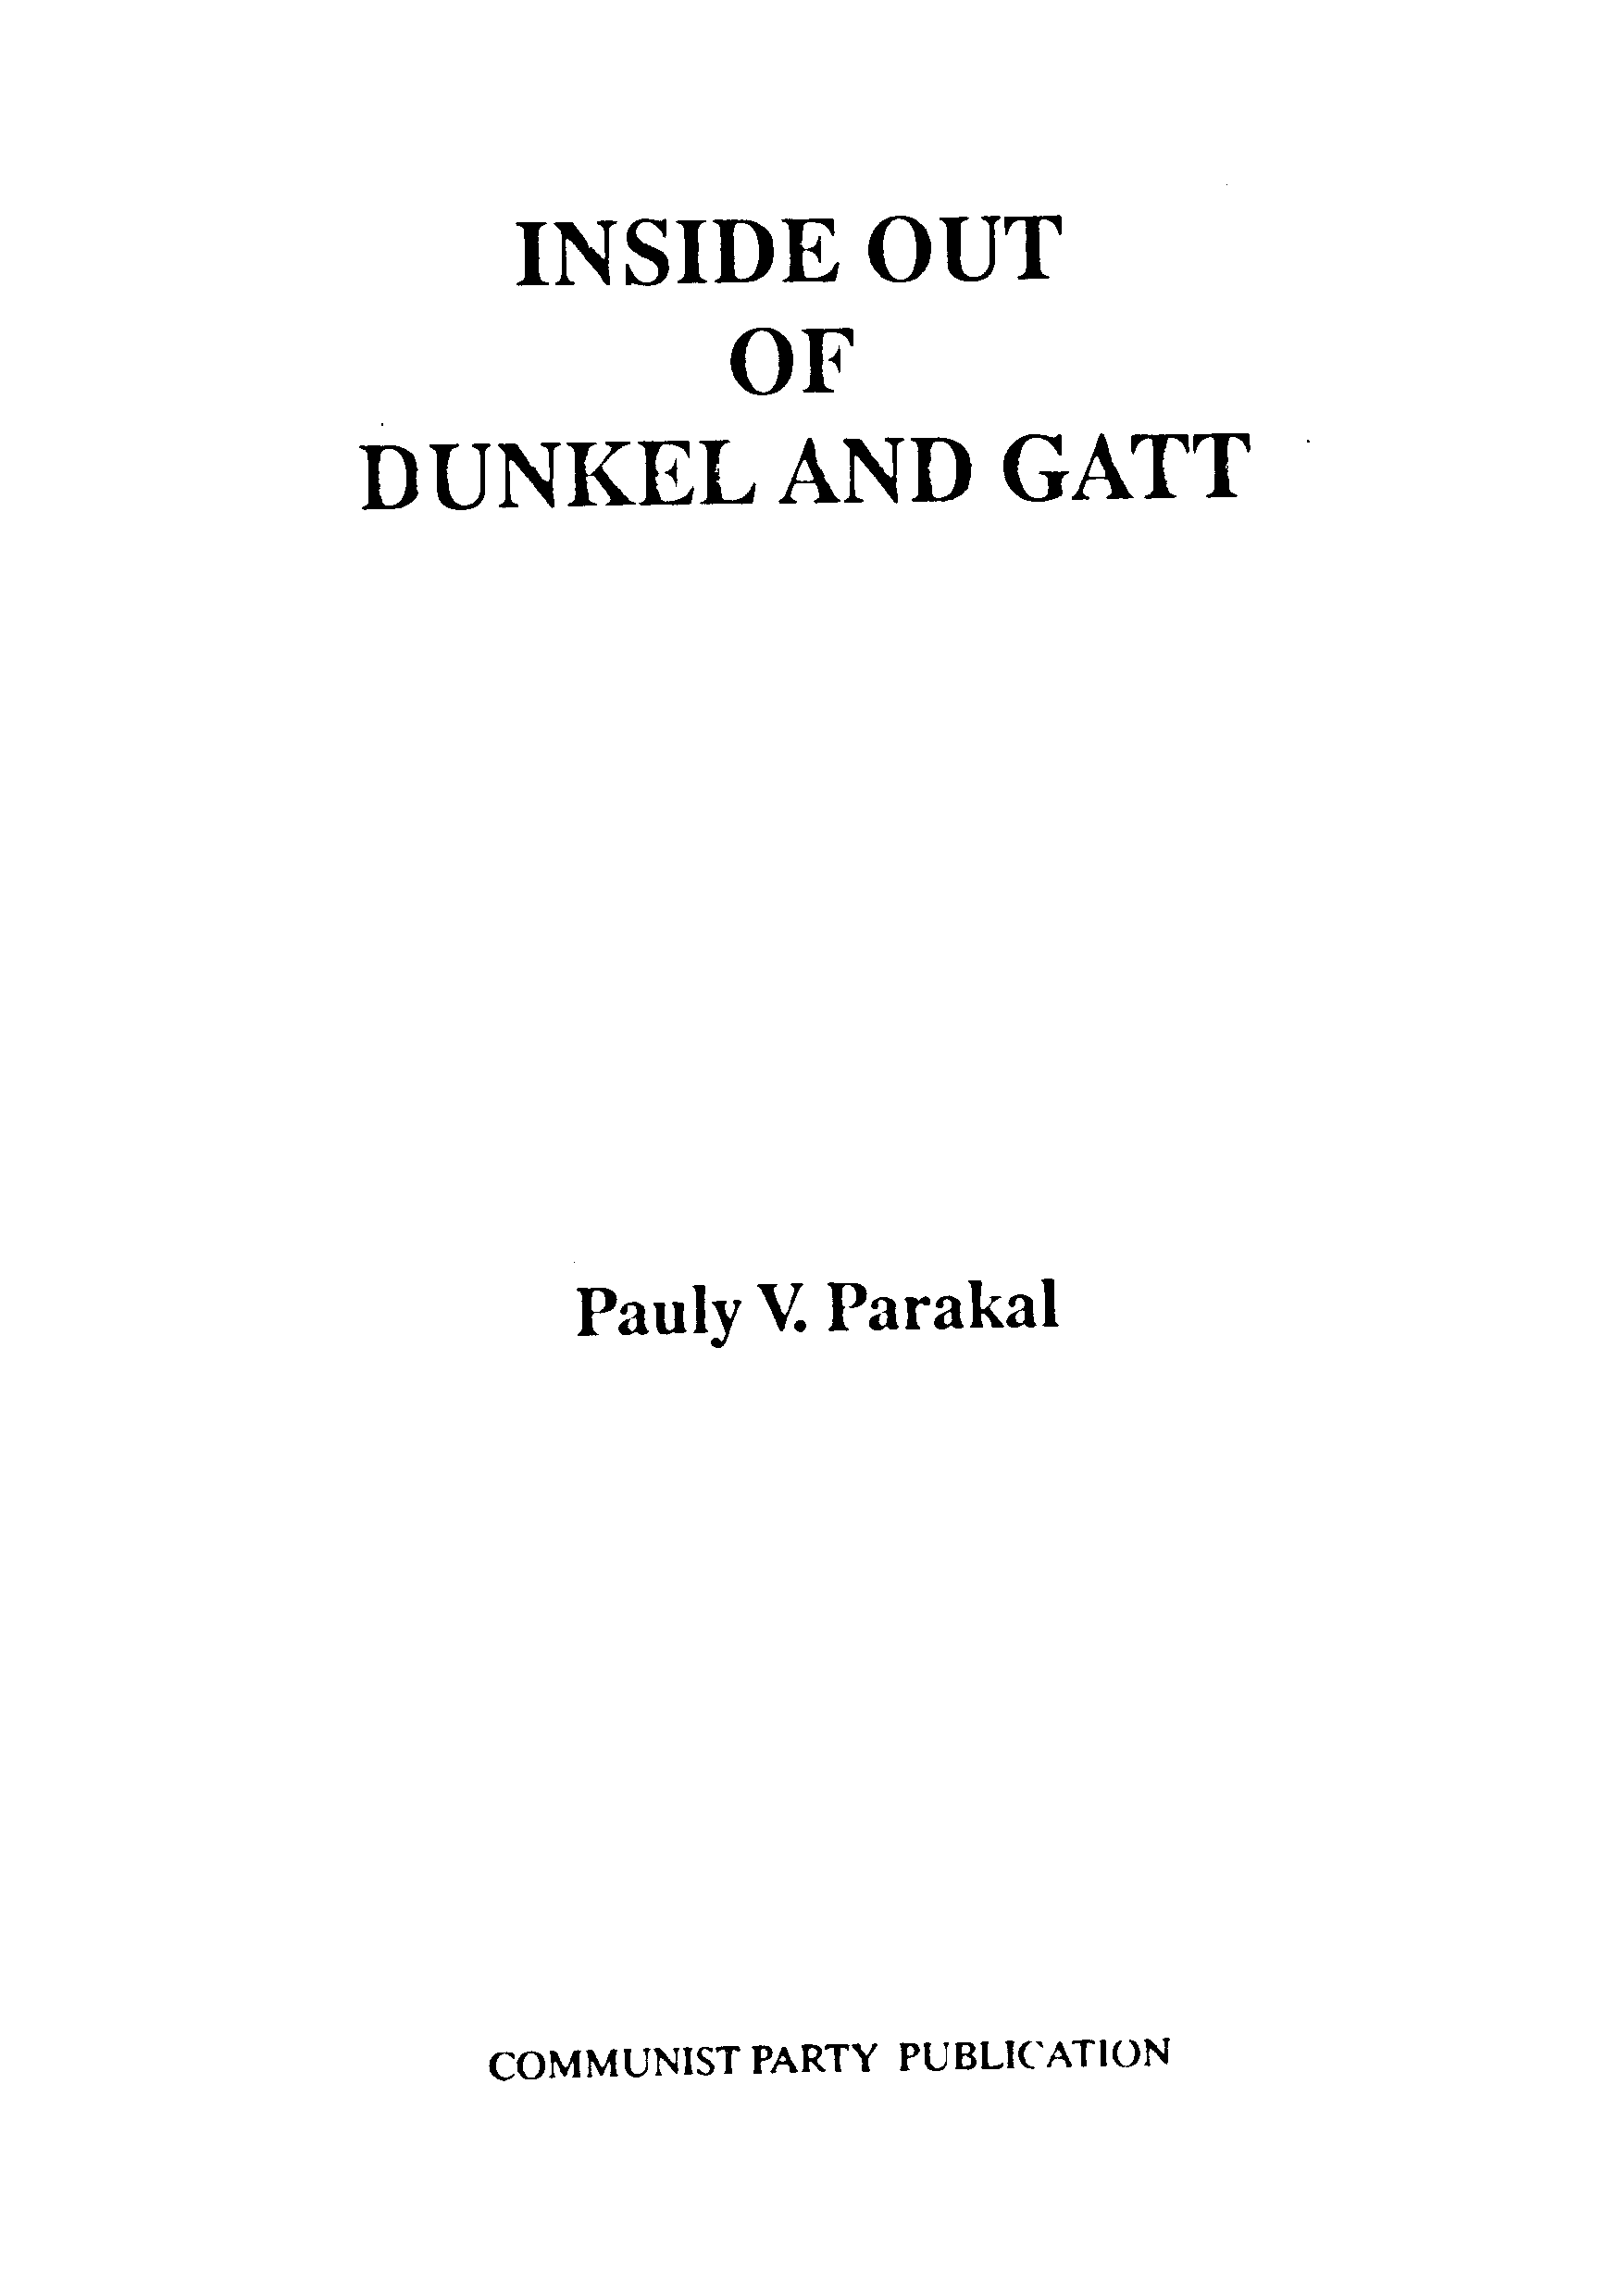 INSIDE OUT OF DUNKEL AND GATT